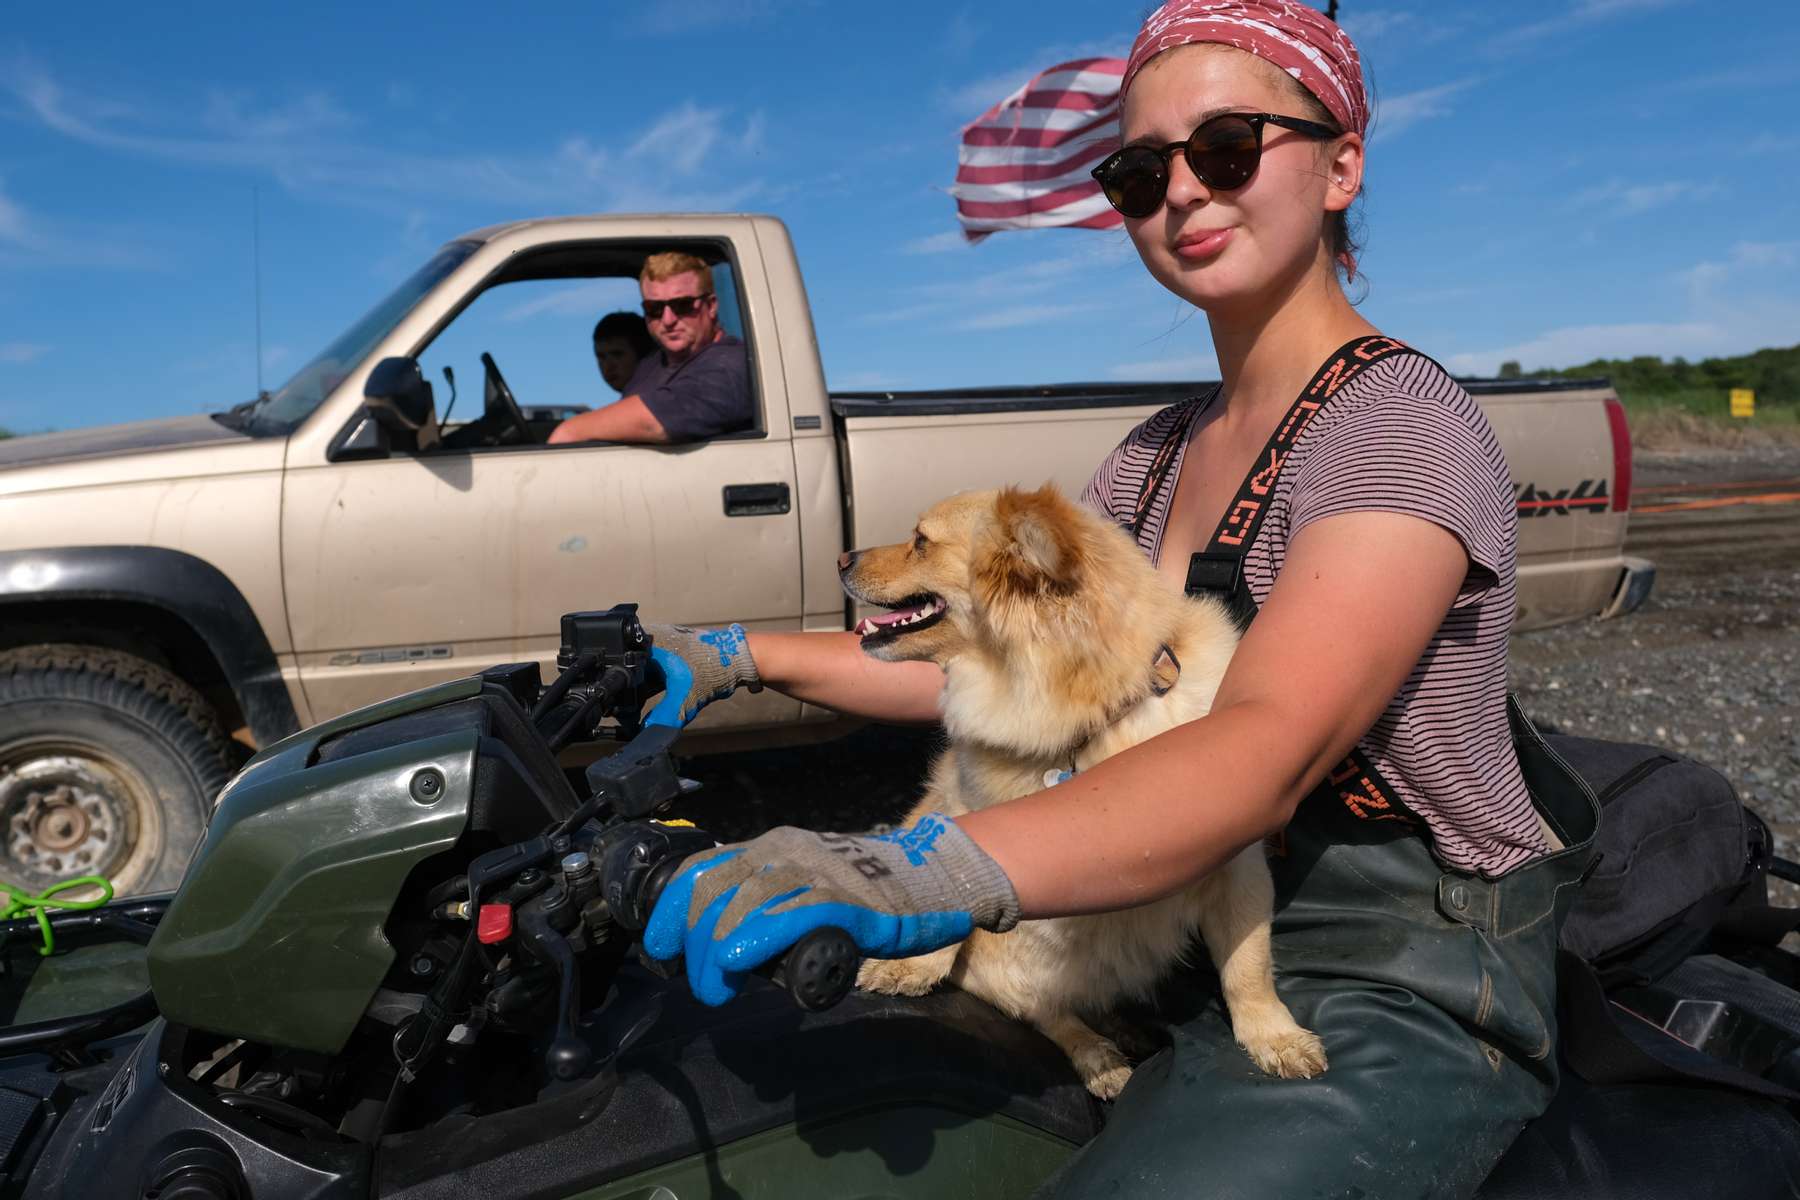 Johnna Bouker, from Dillingham, Alaska, rides a four-wheeler with her dog as her father, John Paul Bouker, looks on, in Ekuk, Alaska on July 4, 2019. 964 setnet permits were fished last year in Bristol Bay. Approximately 60 of those are fished on Ekuk, where fishing families set up seasonal camps.  (Photo by Karen Ducey)